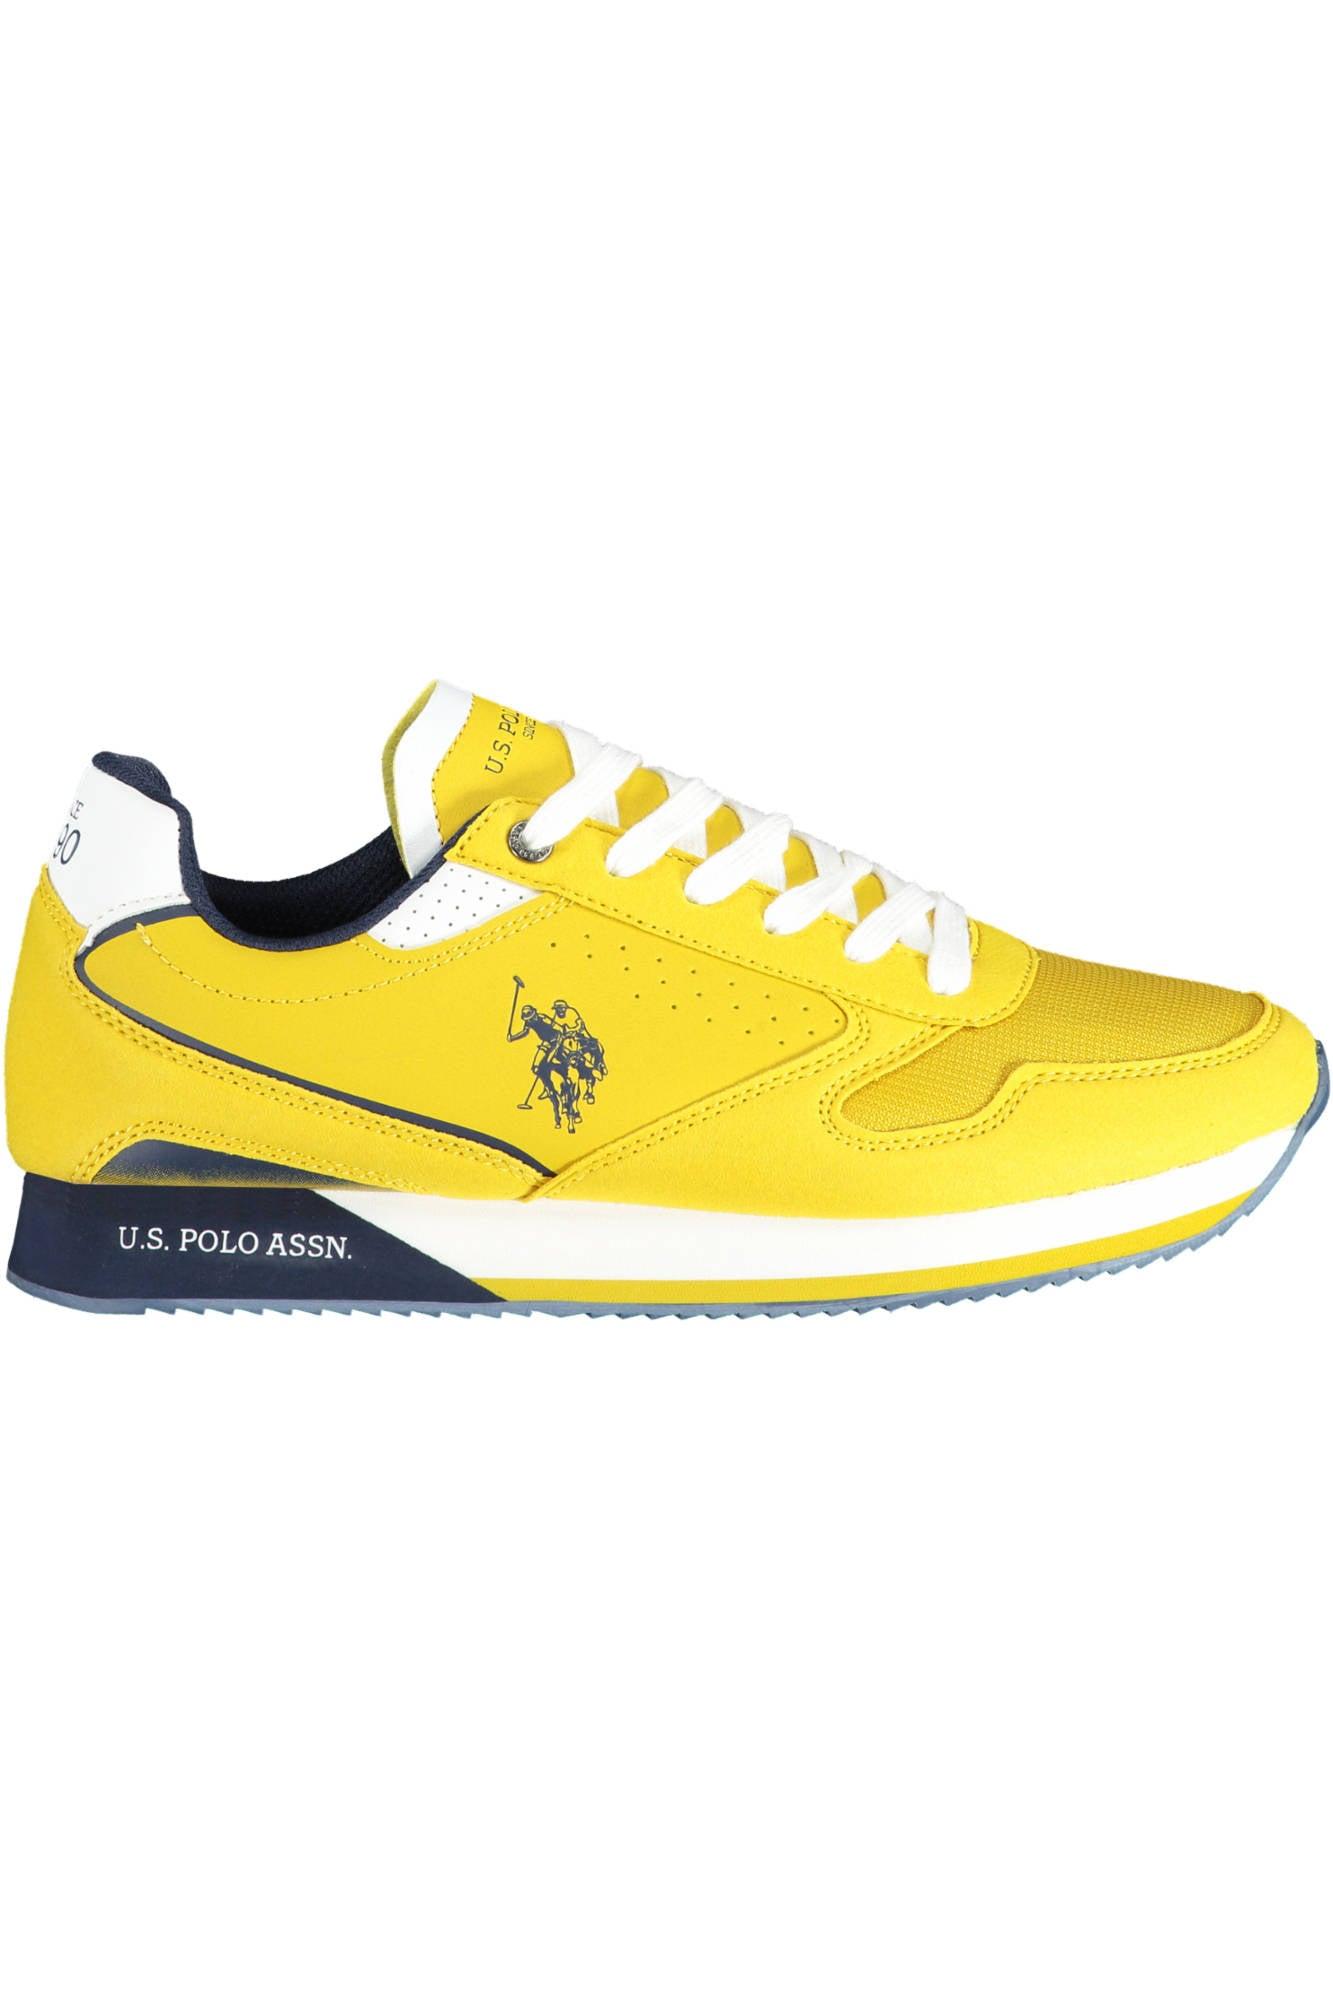 U.S. POLO ASSN. Polyester Sneaker in Yellow for Men | Lyst